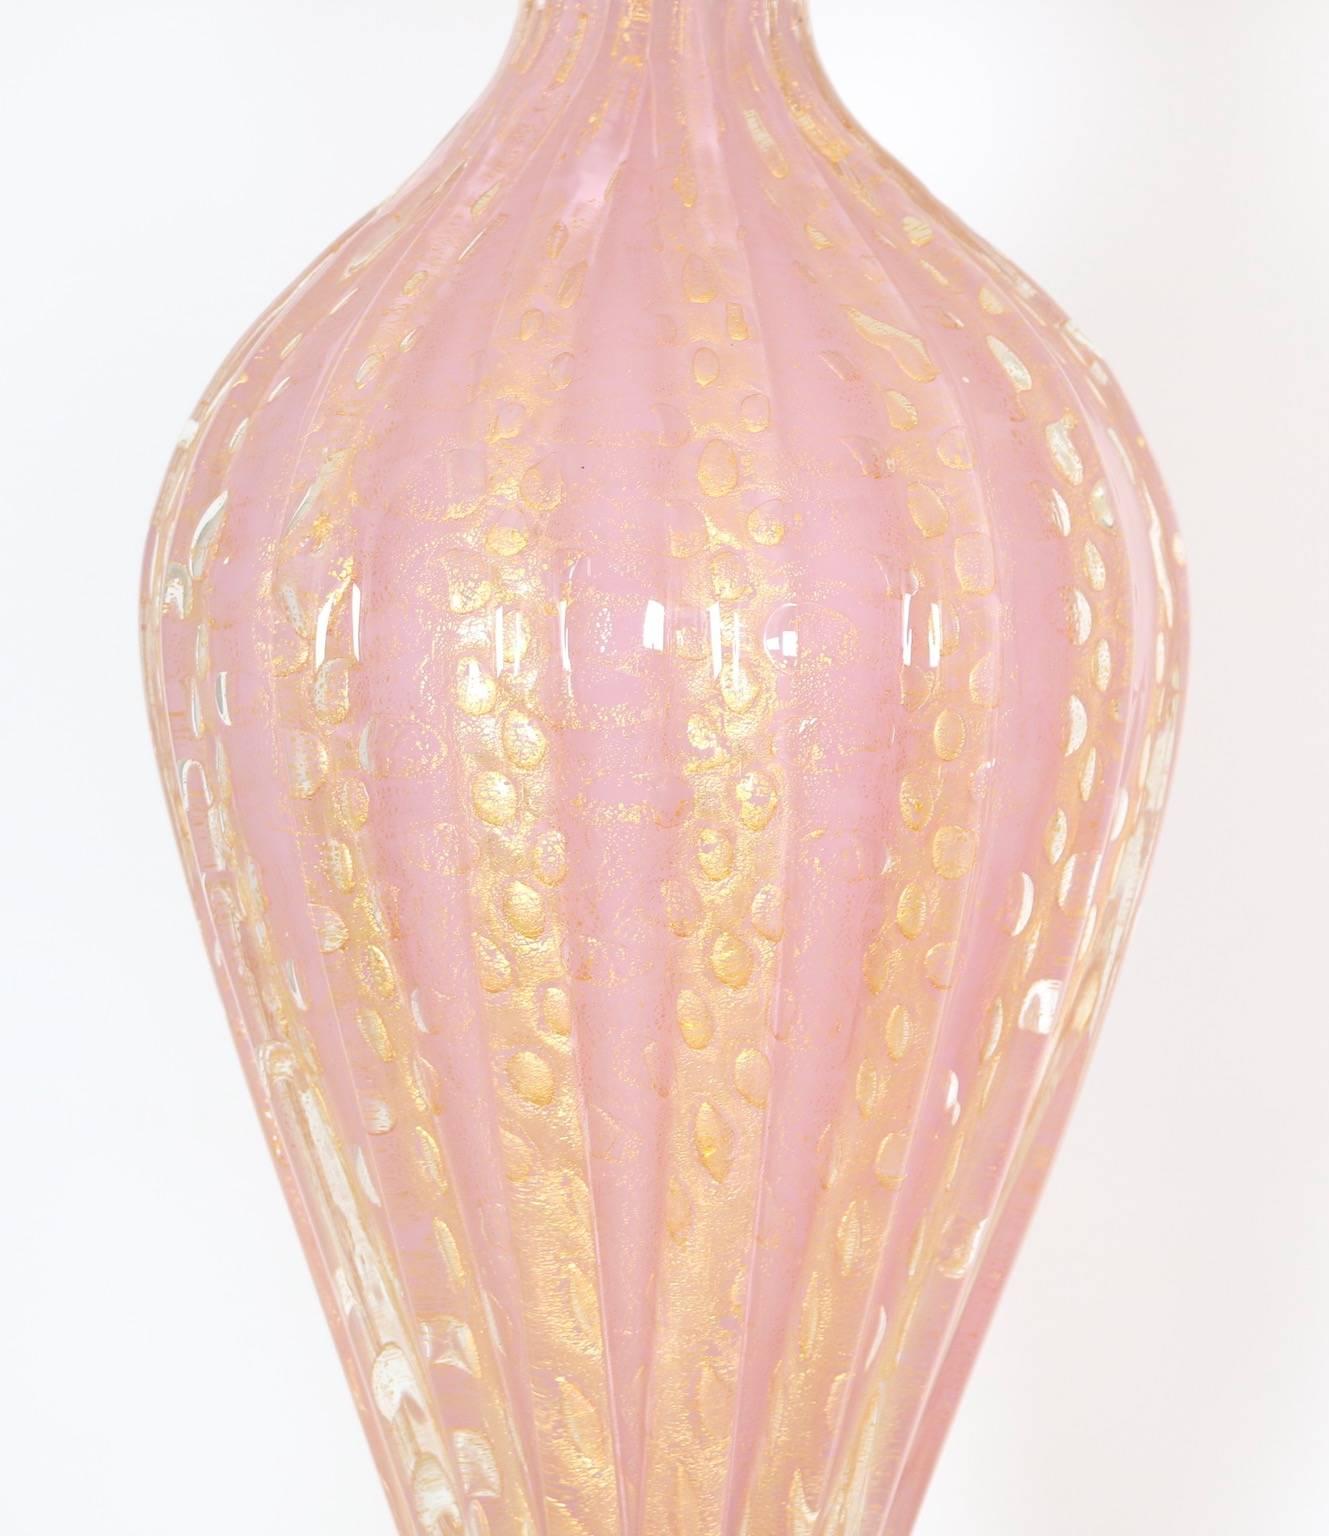 Large Hollywood Regency pair of pink and gold Murano glass lamps by Barovier, created using the cordonato d'oro technique. The pink toned glass featured gold dust profusely infused throughout. Each is in excellent vintage condition having wear